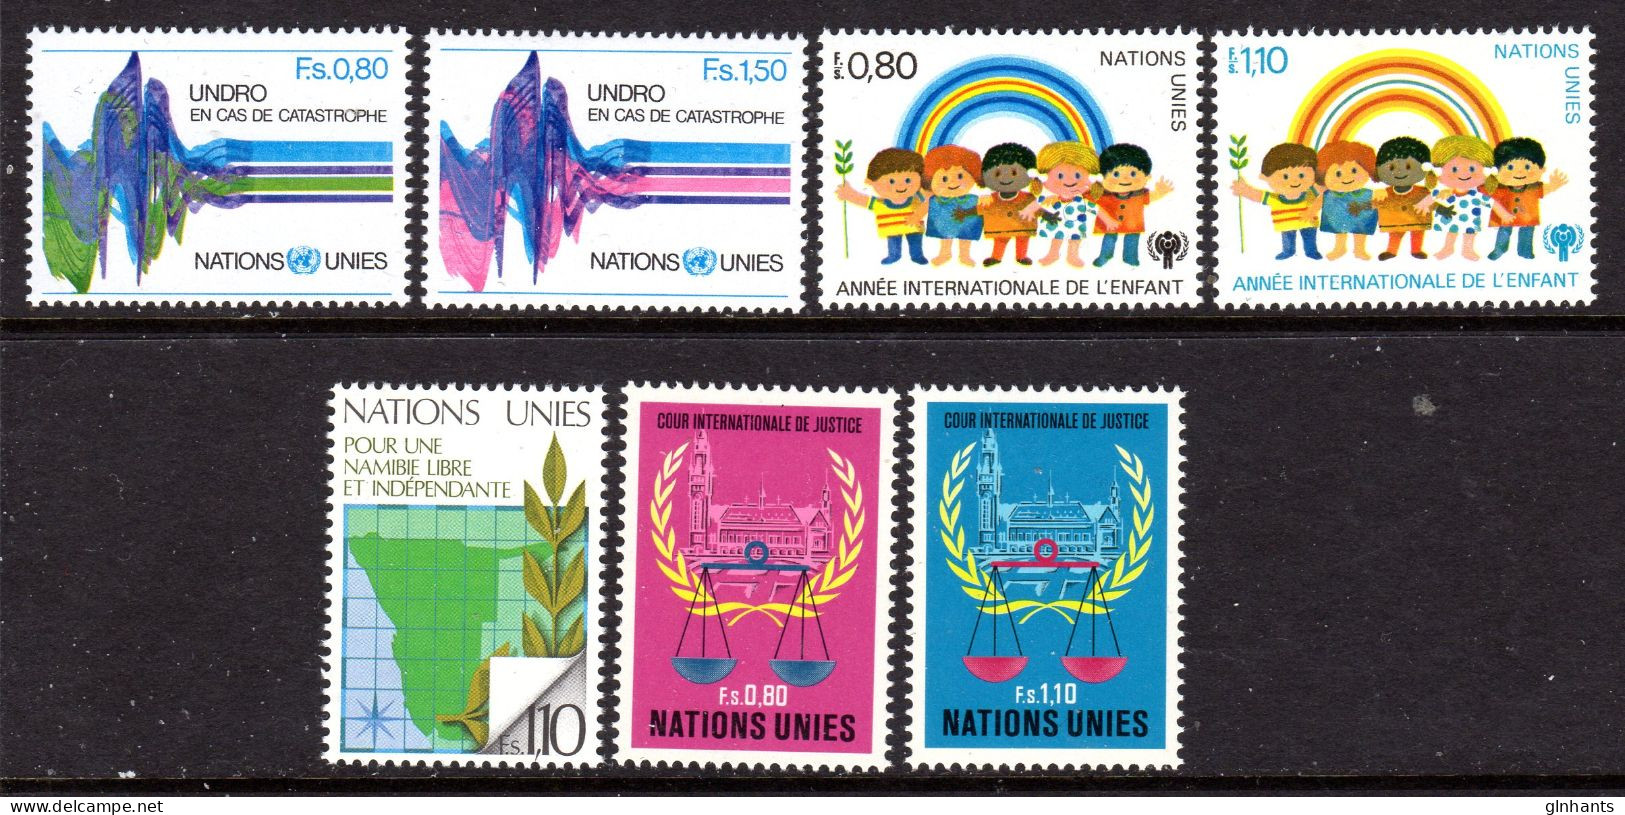 UNITED NATIONS UN GENEVA - 1979 COMPLETE YEAR SET (7V) AS PICTURED FINE MNH ** SG G82-G88 - Neufs